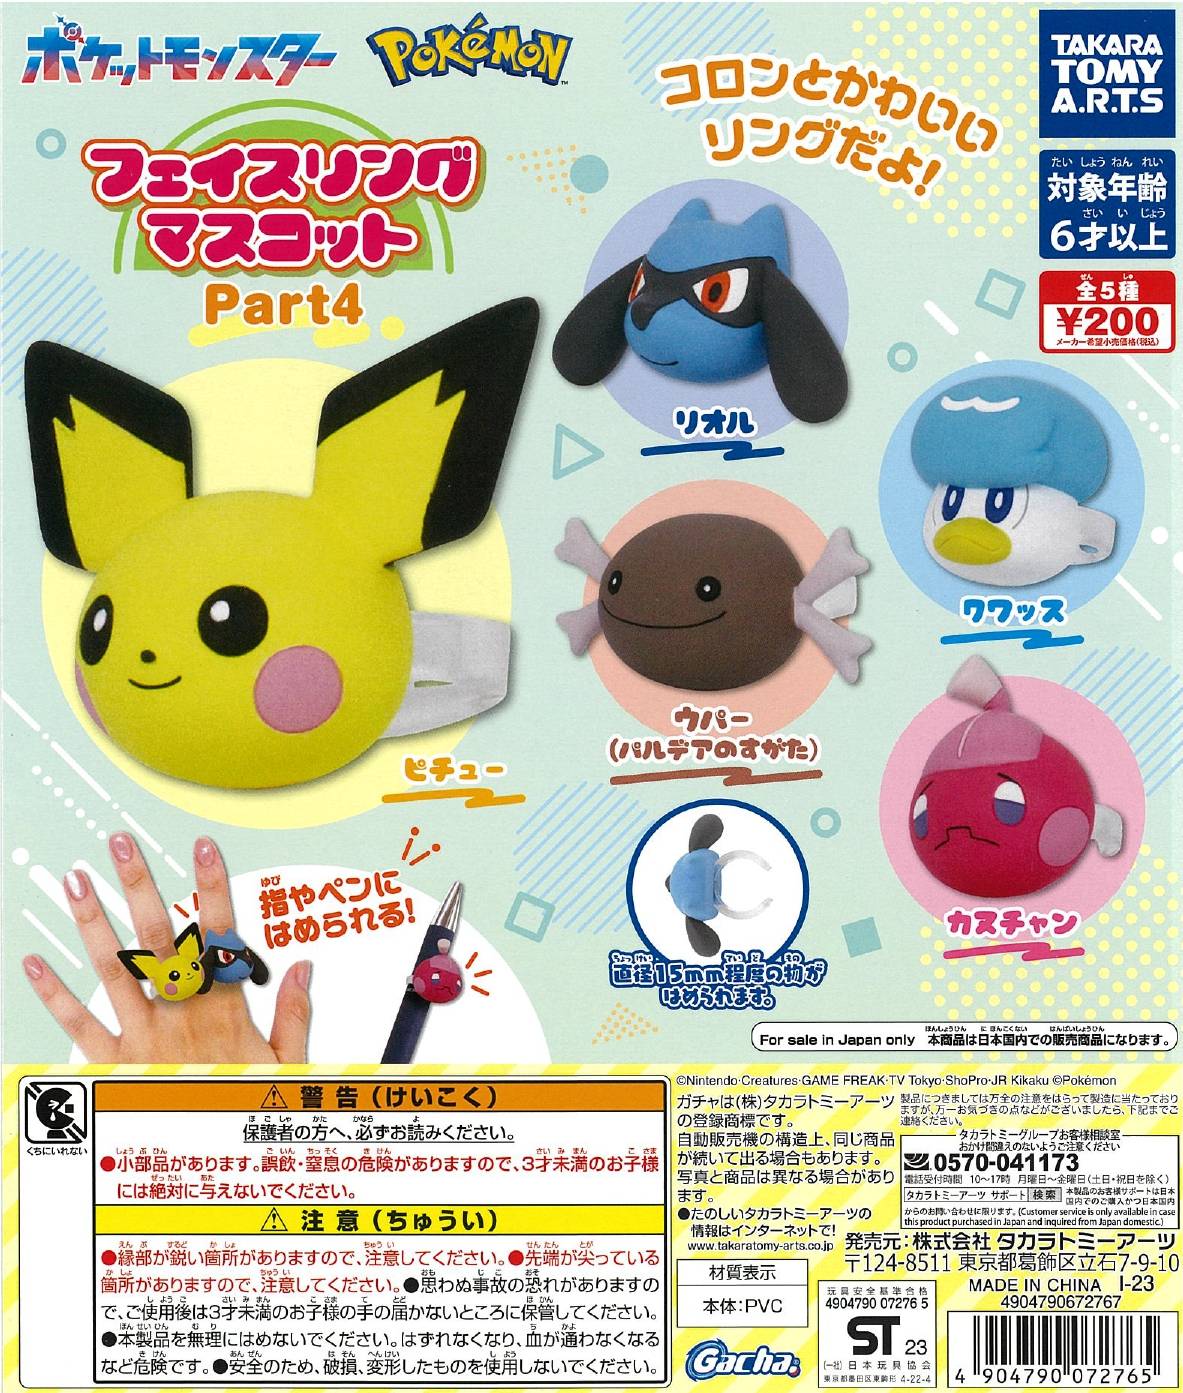 CP2587 Pokemon Face Ring Mascot Part 4